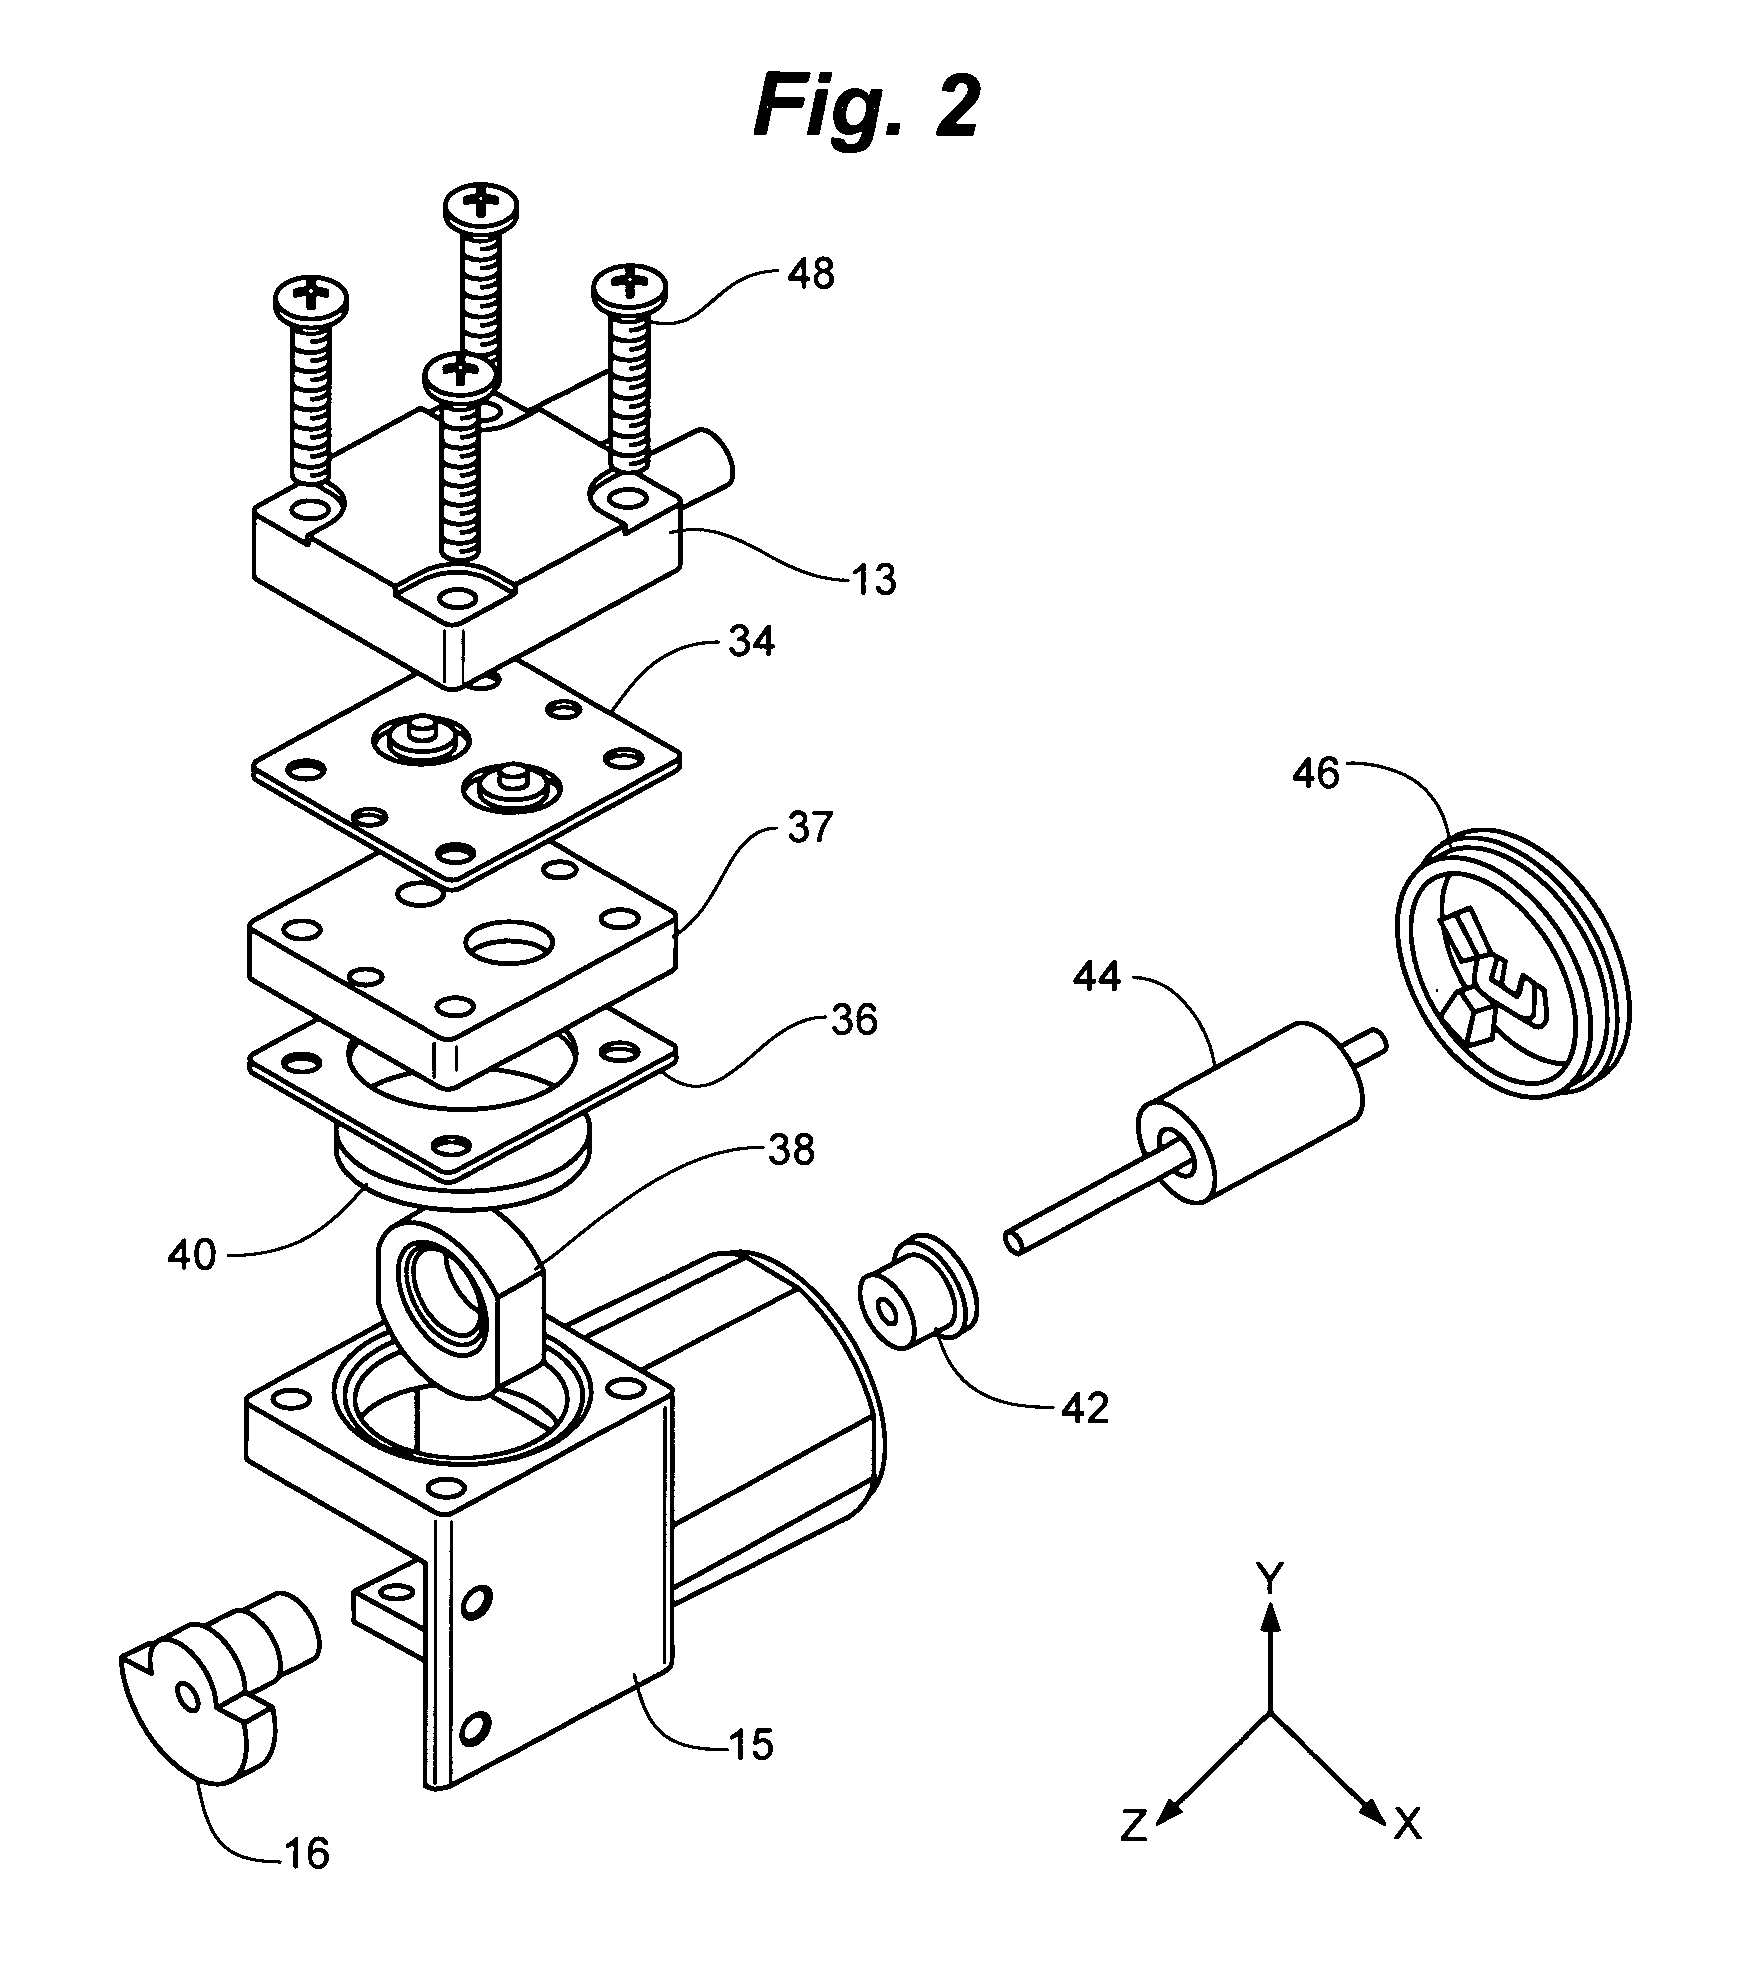 Integrated pump and motor